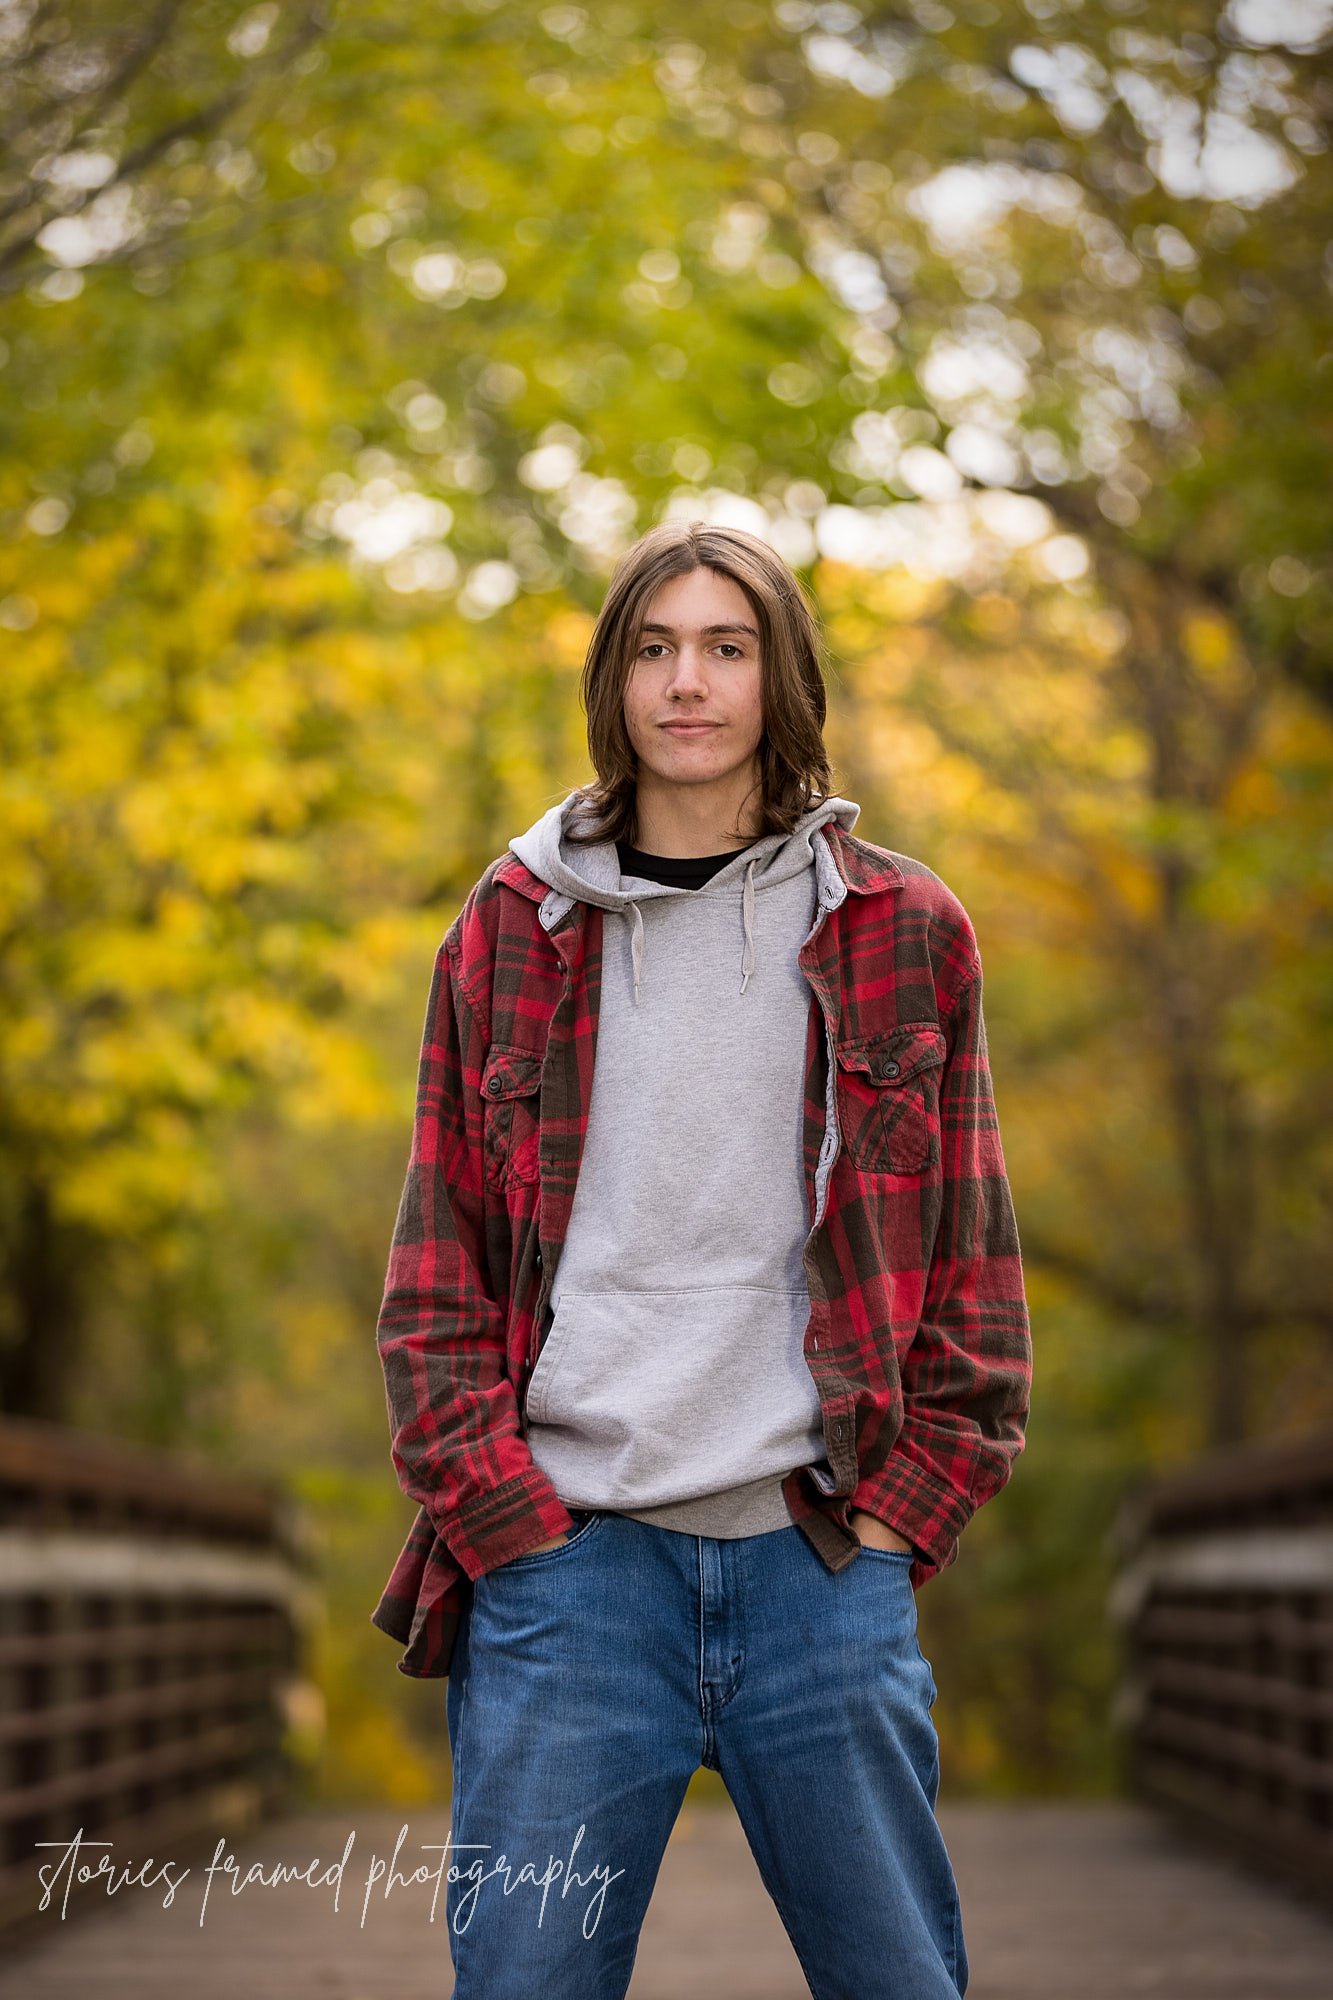 Wauwatosa-senior-pictures-Stories-Framed-102721-06.jpg